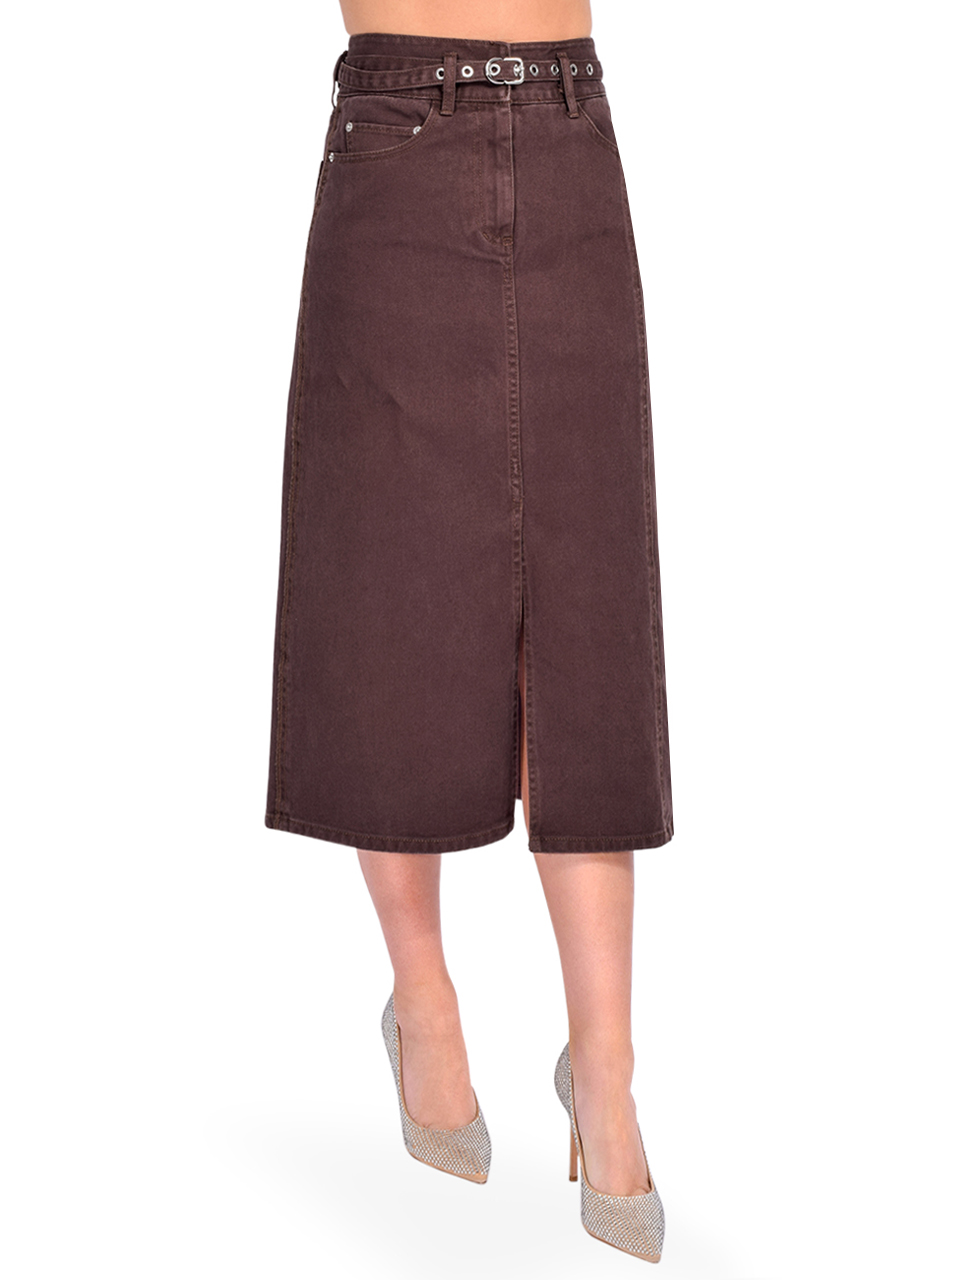 3.1 Phillip Lim Denim A-Line Skirt in Coffee Side View 